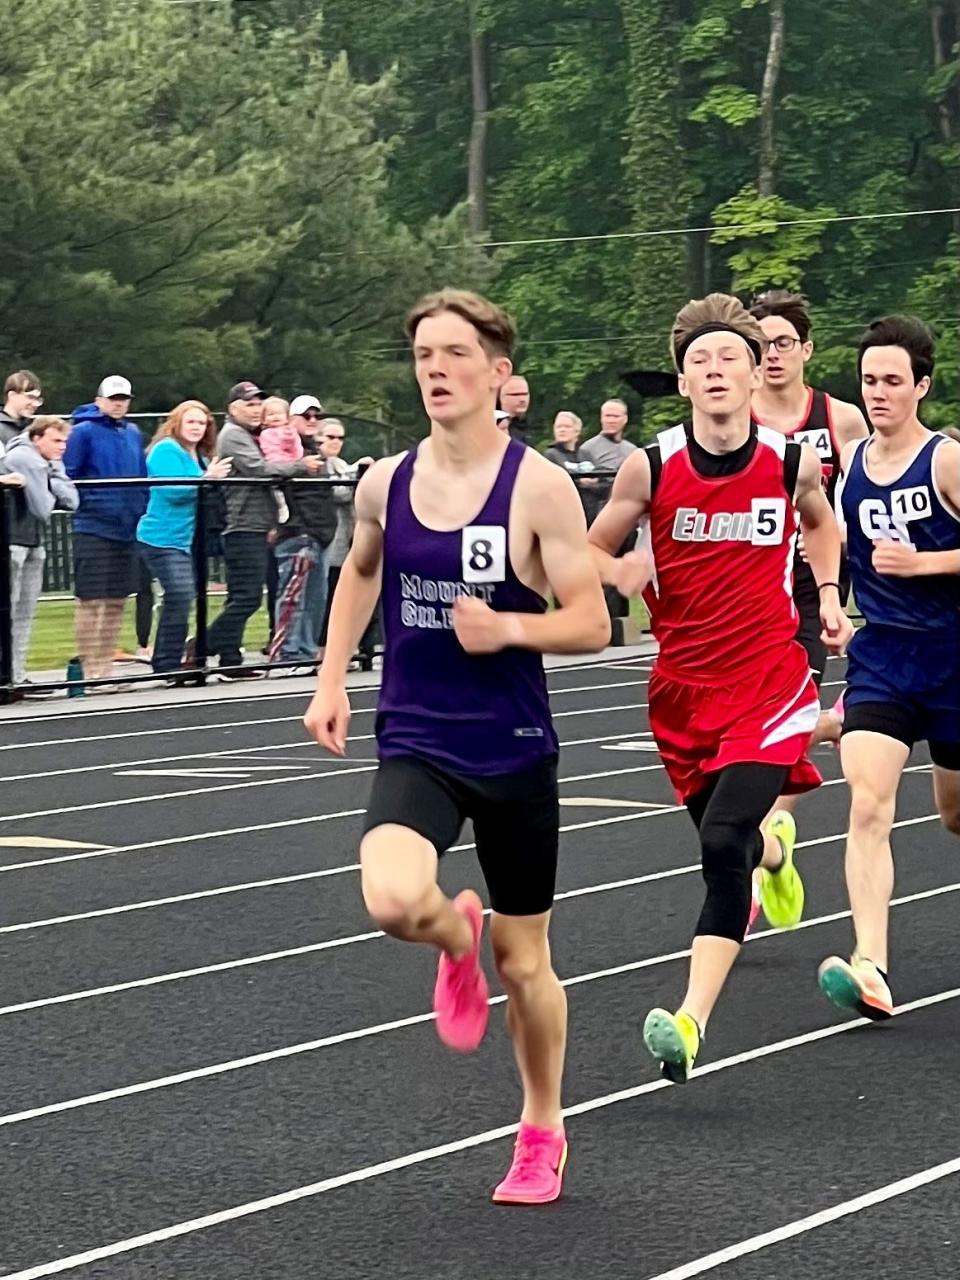 Mount Gilead's Will Baker and Elgin's Ethan Marshall, competing in last weekend's Division III district track meet in Granville in the 1600 meters, both earned state spots as part of the 4x800 boys relays at their respective schools during Wednesday's regional in Heath.